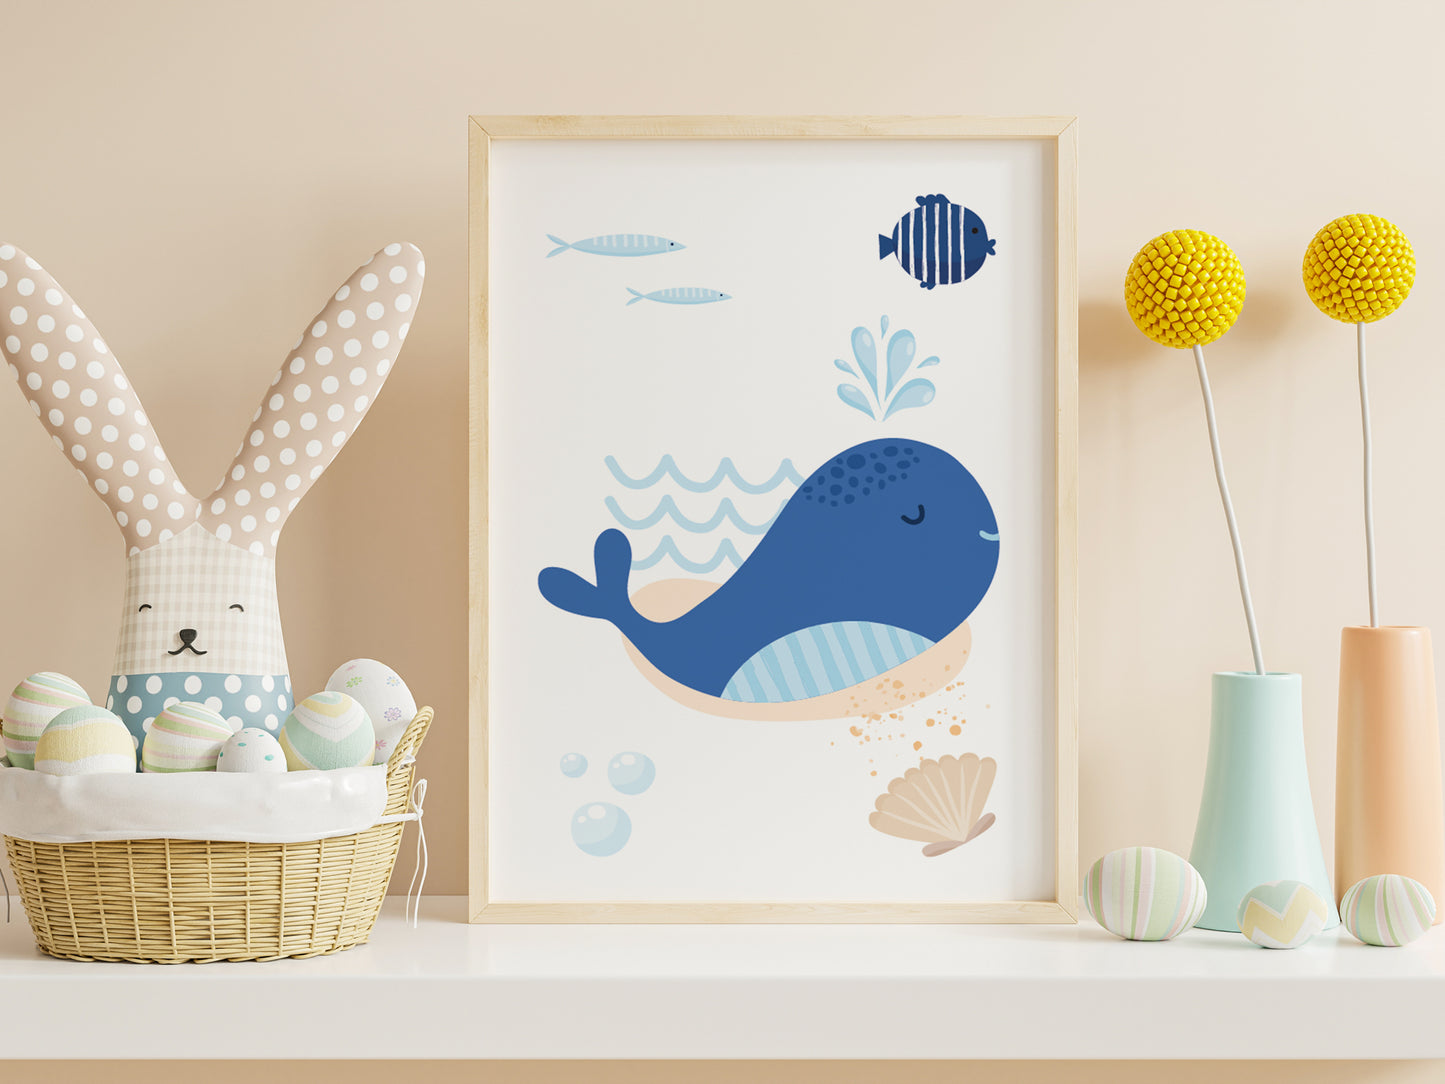 Posters sailor boat fish whale shell - 3 posters baby child room - Decoration - birth gift - ocean sea - bb deco ocean